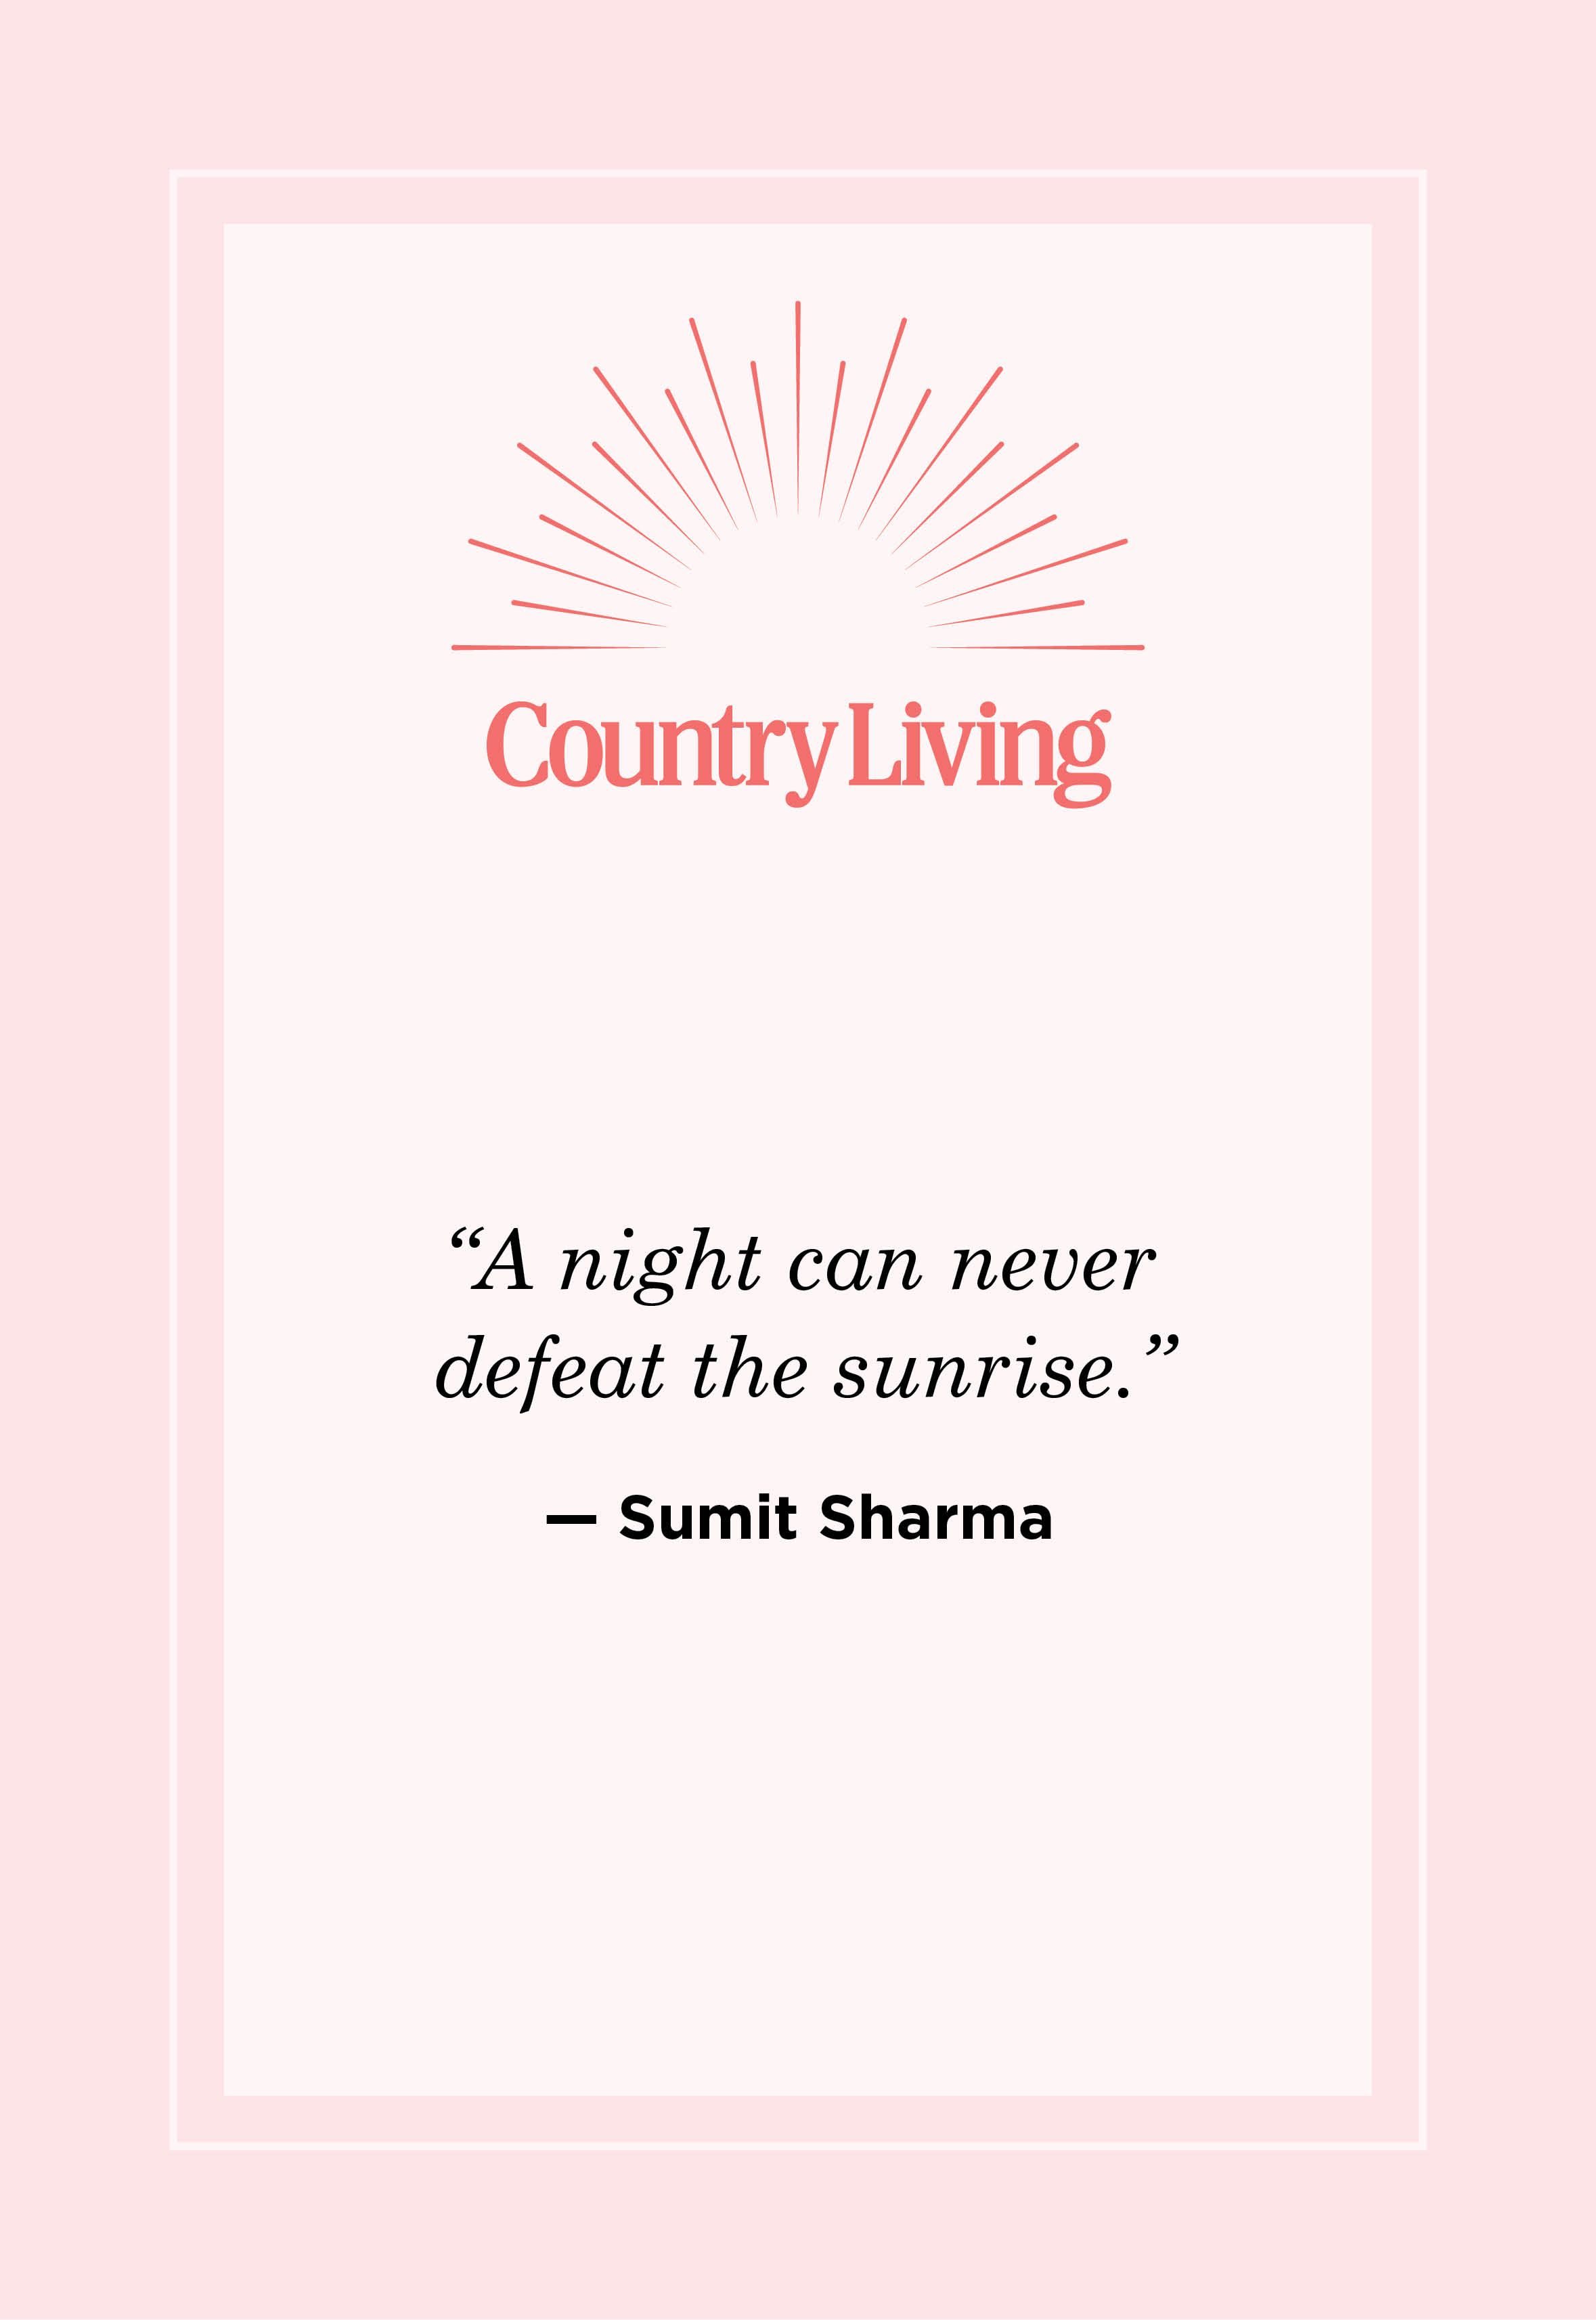 Sunrise Quotes Sayings About The Start Of A New Day